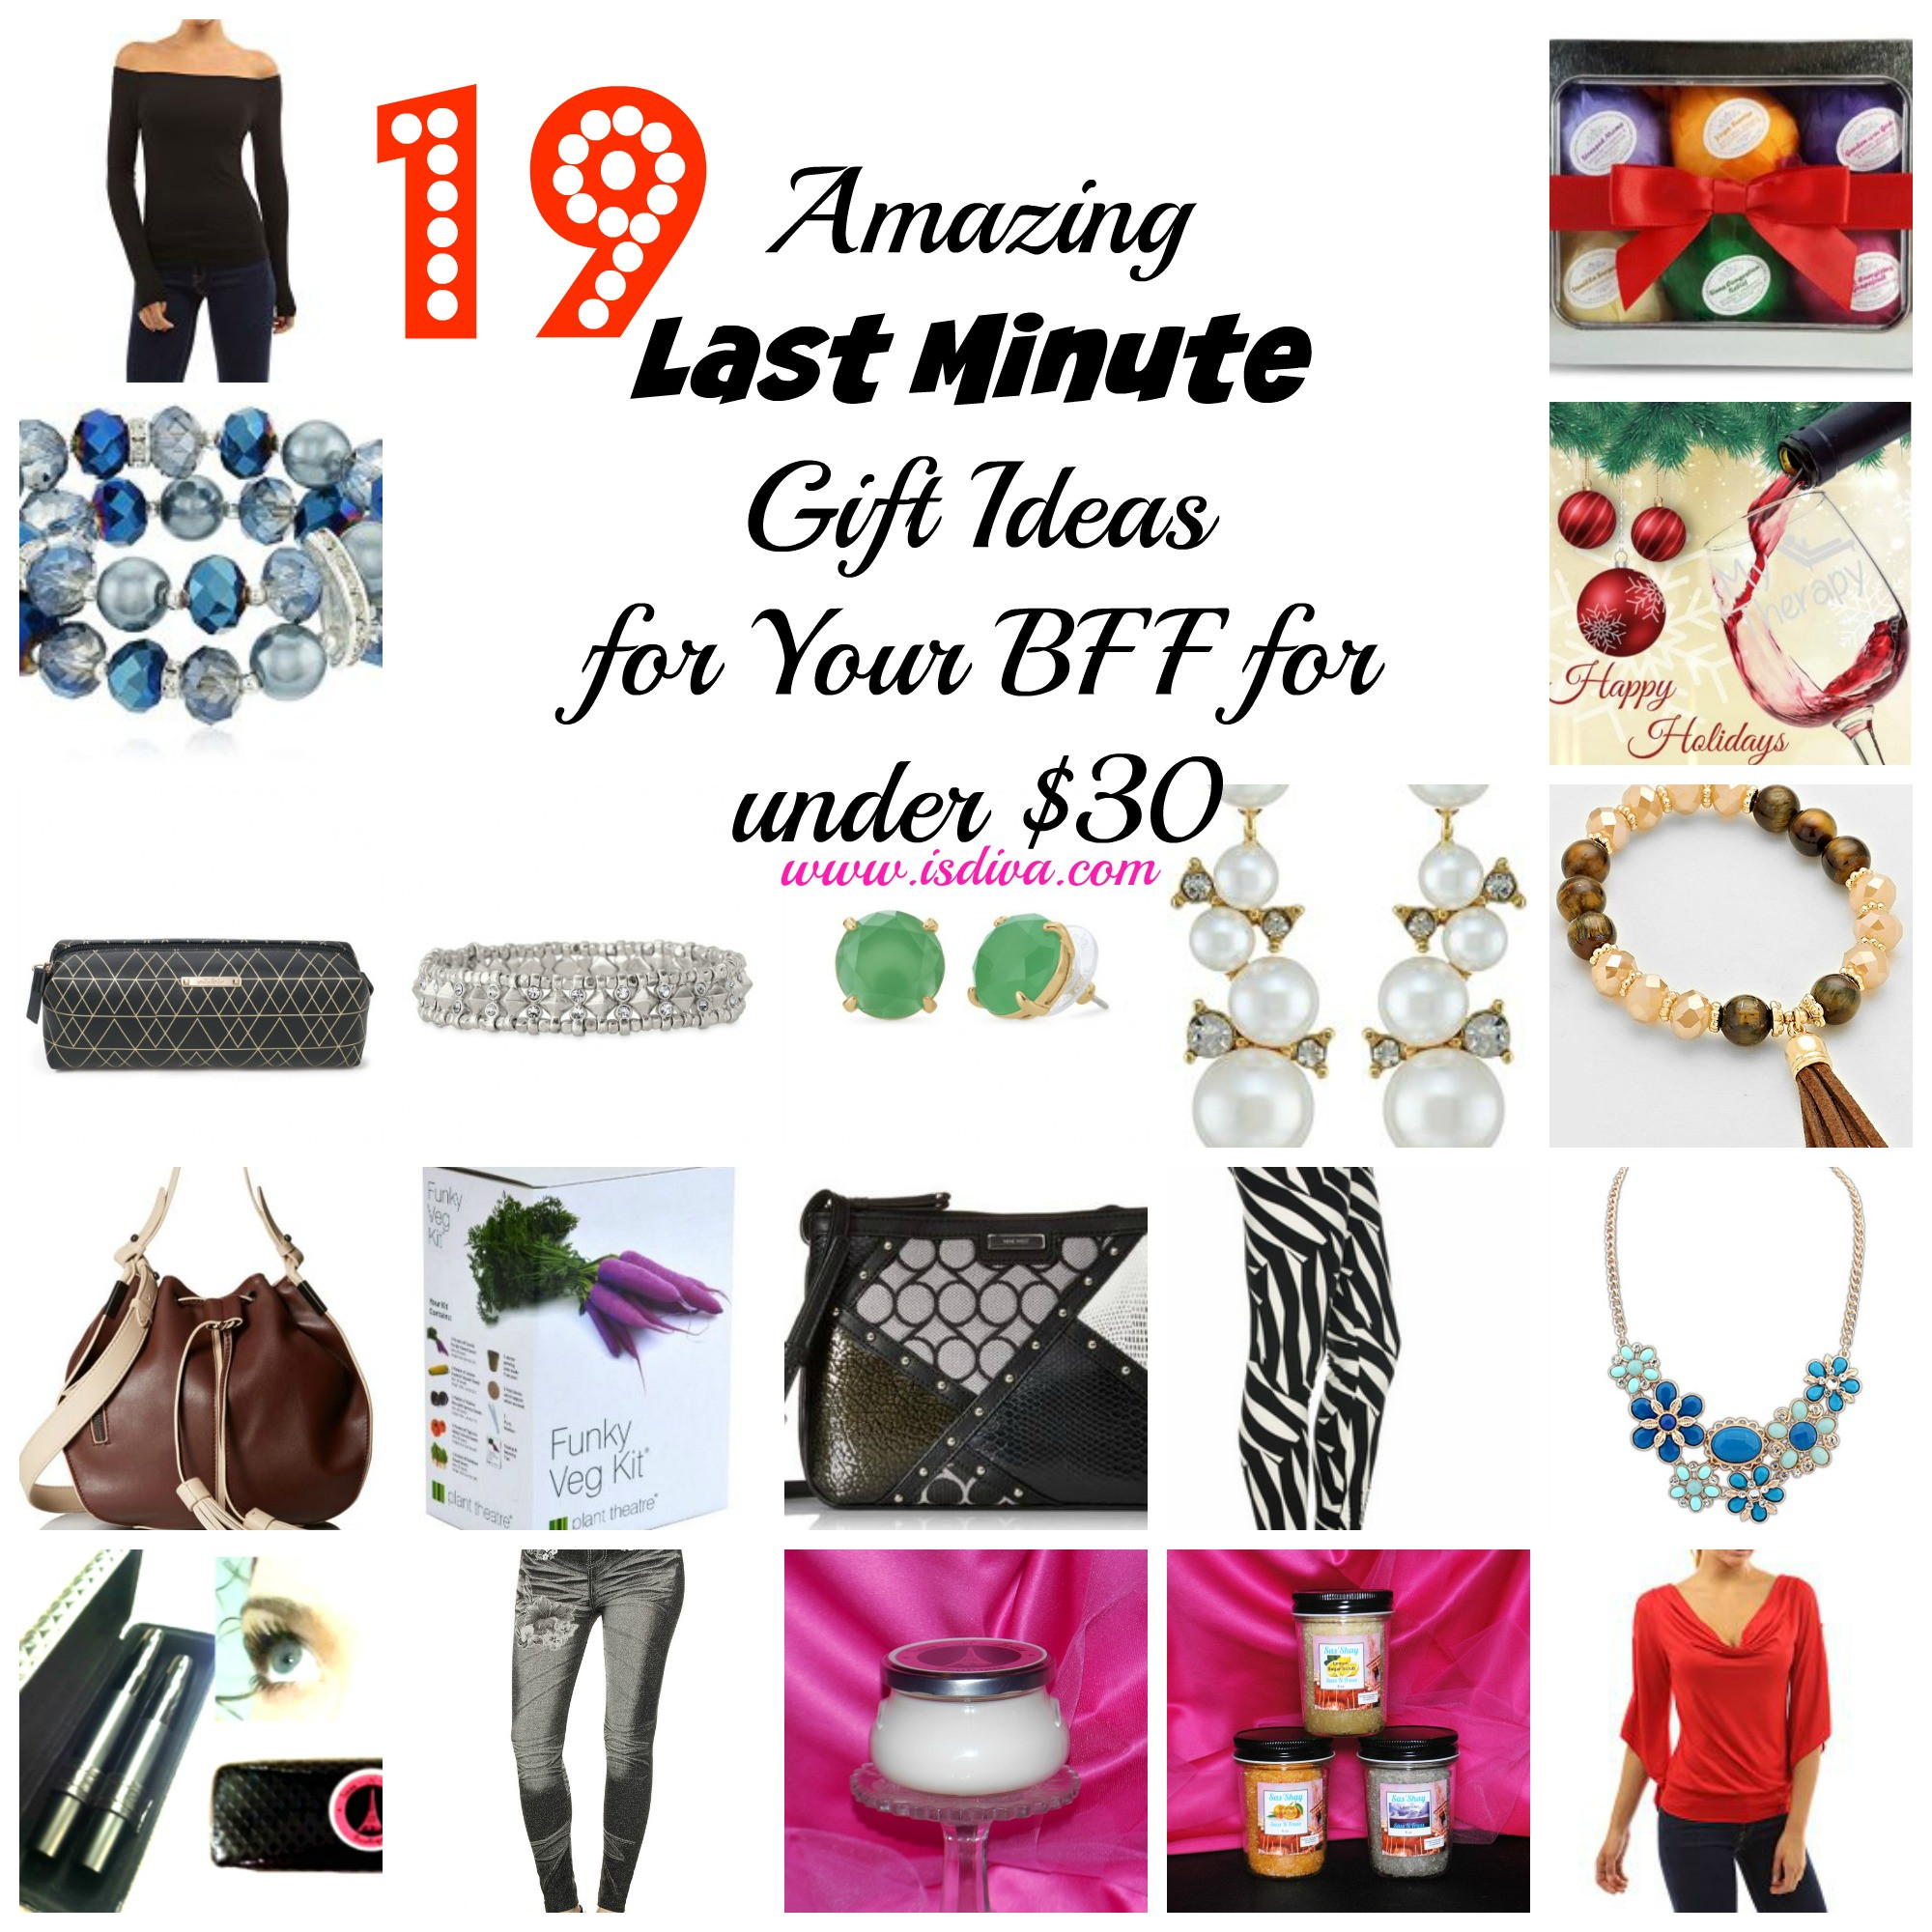 Gift Ideas For Friends Birthday Female
 Do you need some last minute t ideas for your best